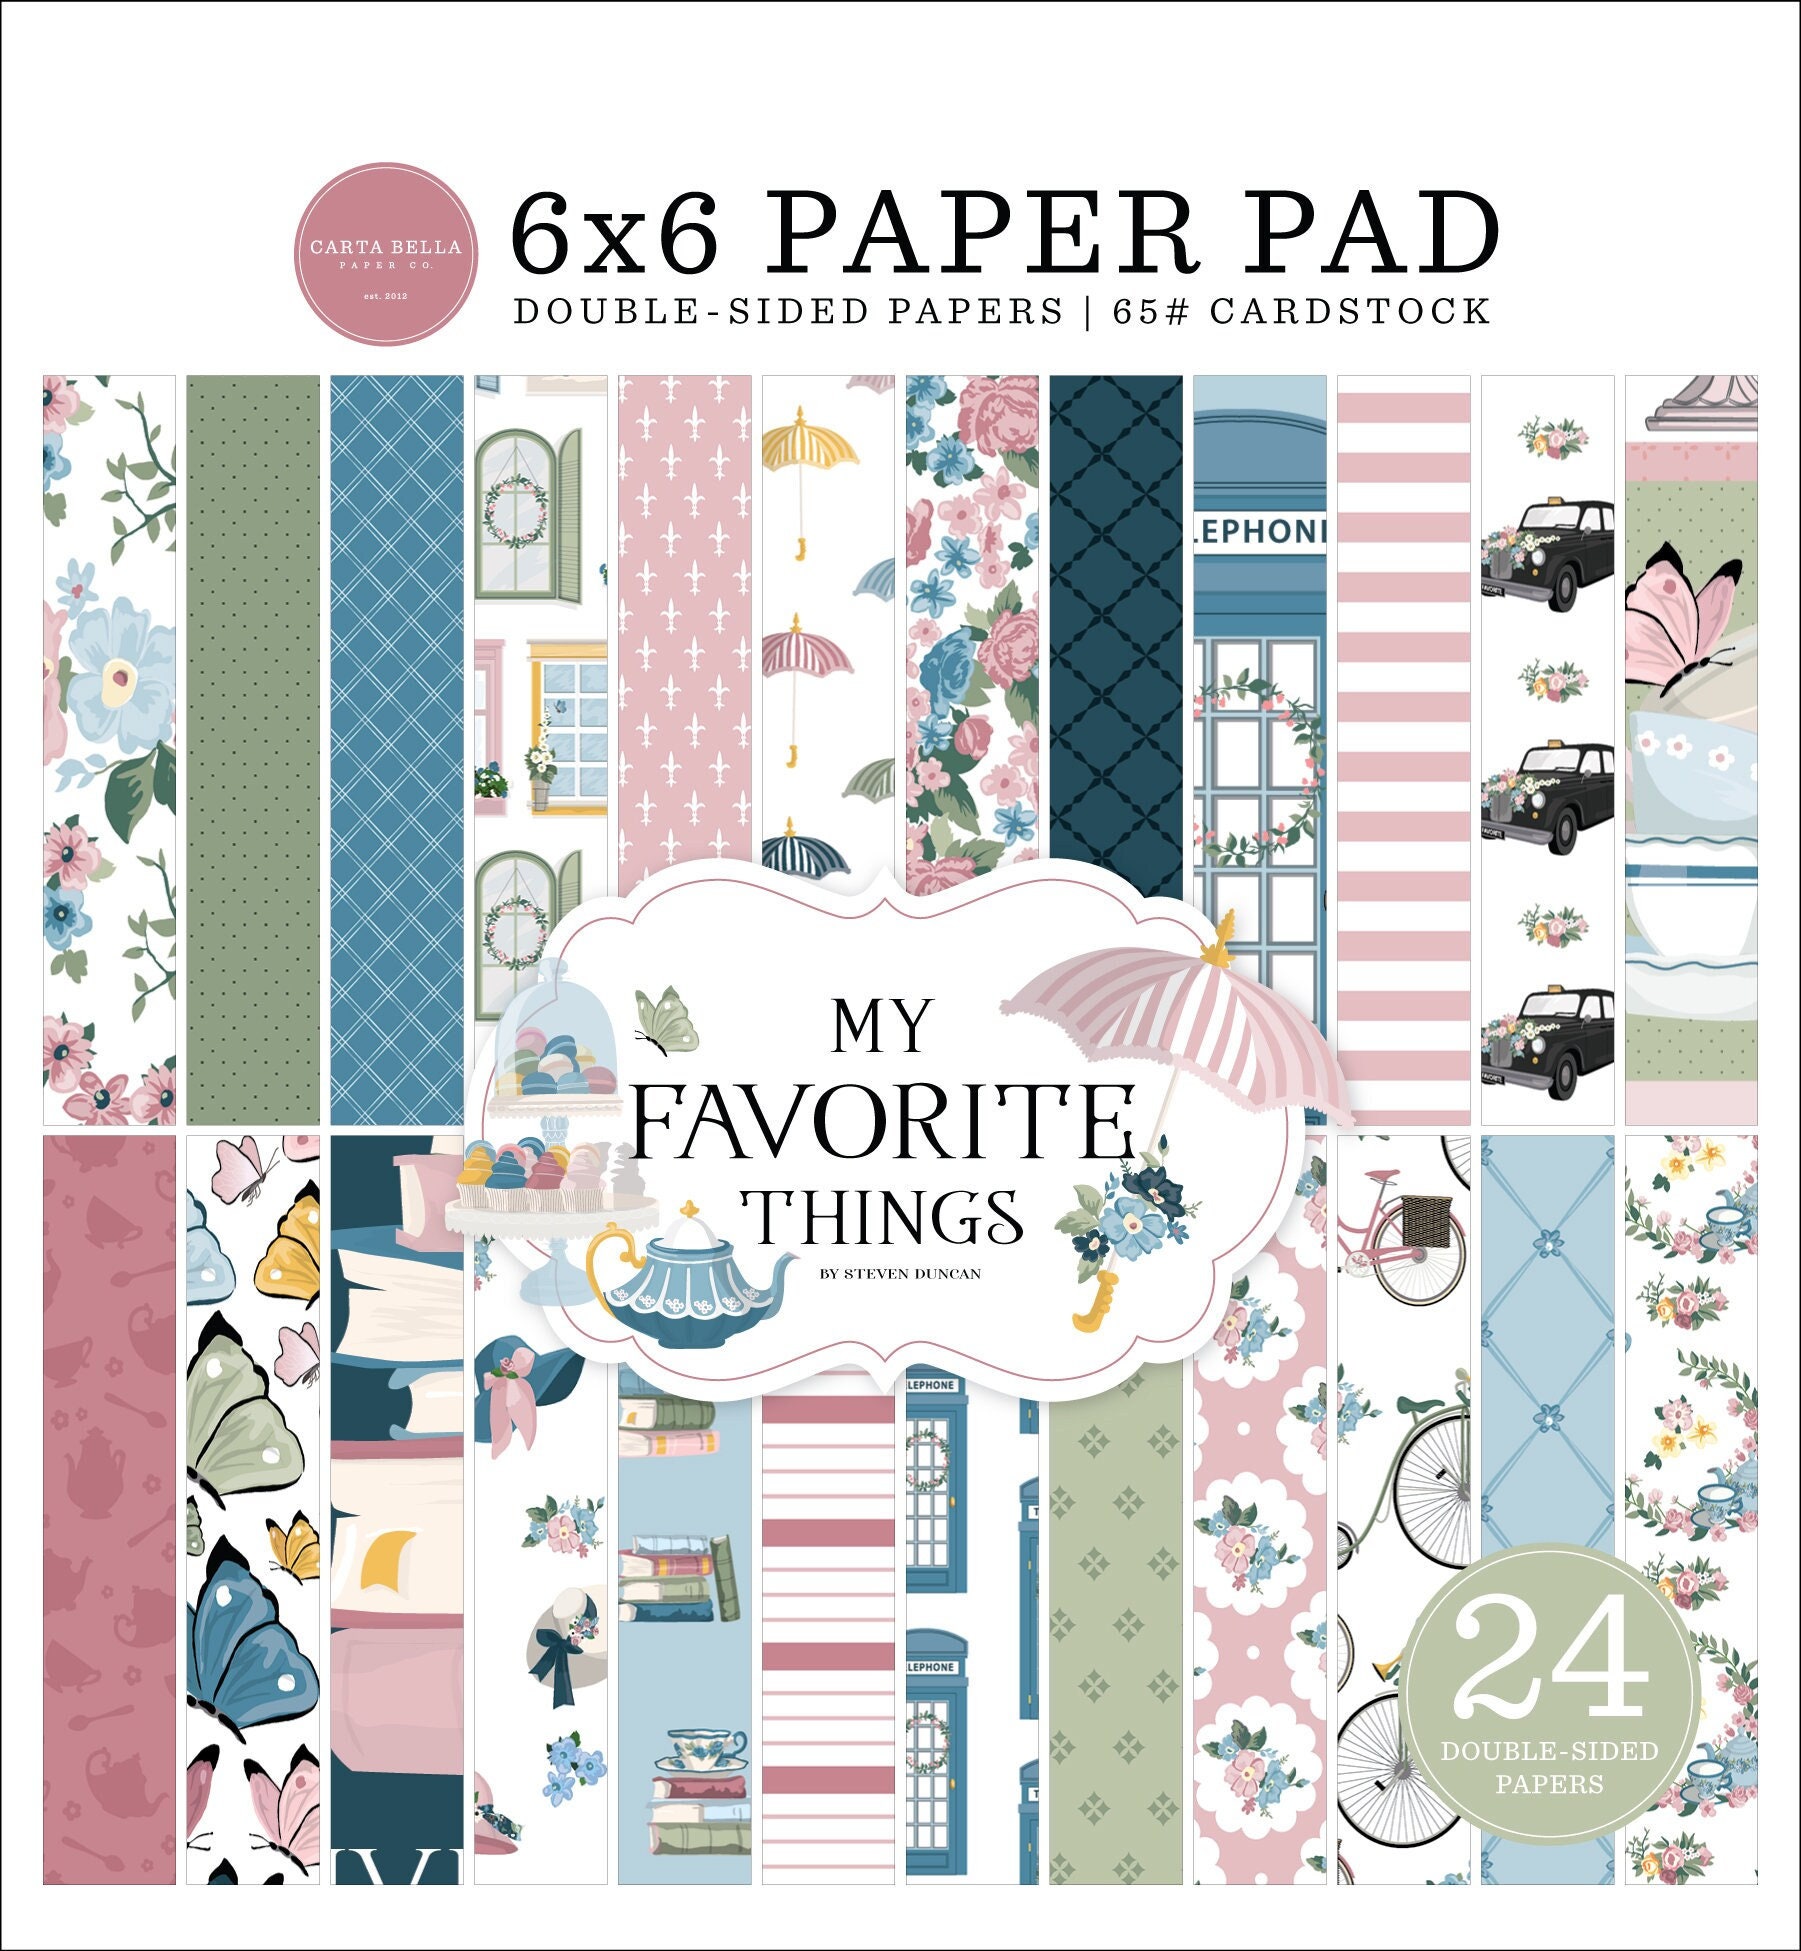 Cardstock 8.5 x 11 Paper Pack - Assorted Colored Scrapbook Paper 65lb - Double Sided Card Stock for Crafts, Embossing, Cardmaking - 50 Sheets, Solid